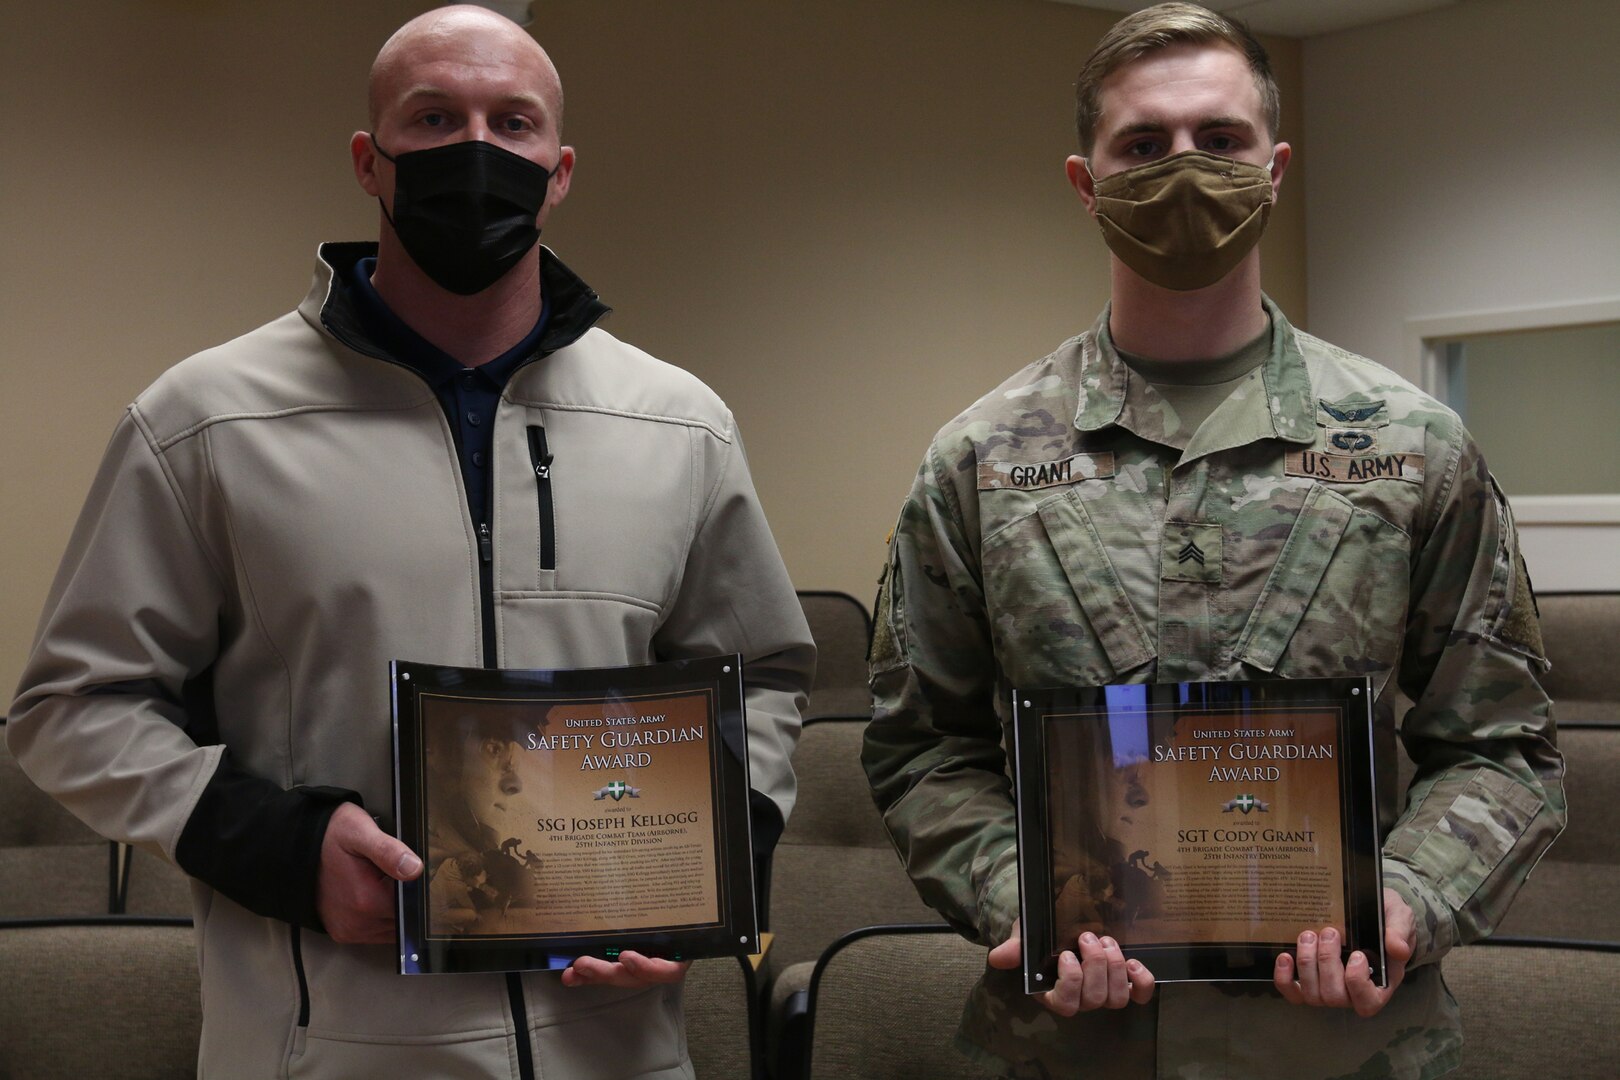 Spartan Paratroopers Recognized for Saving a Life